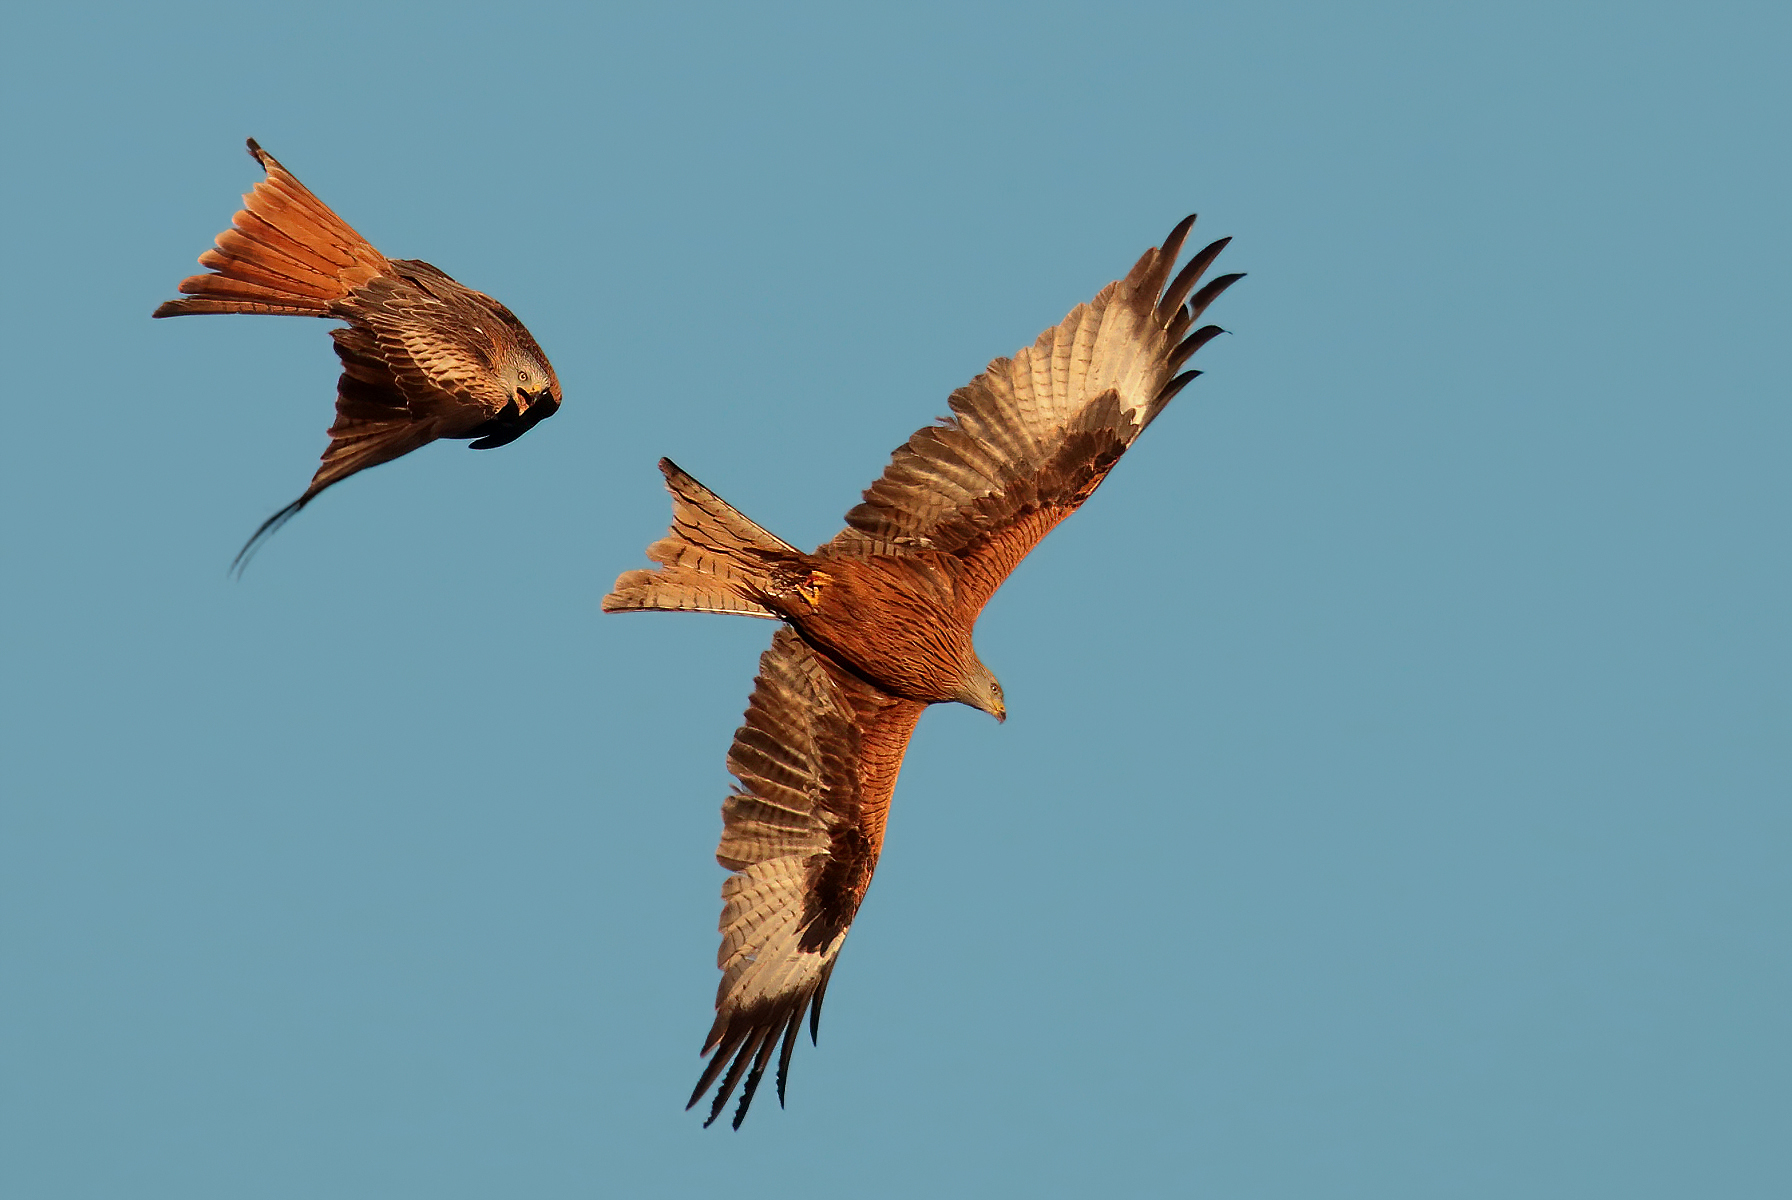 Chase between red kites...